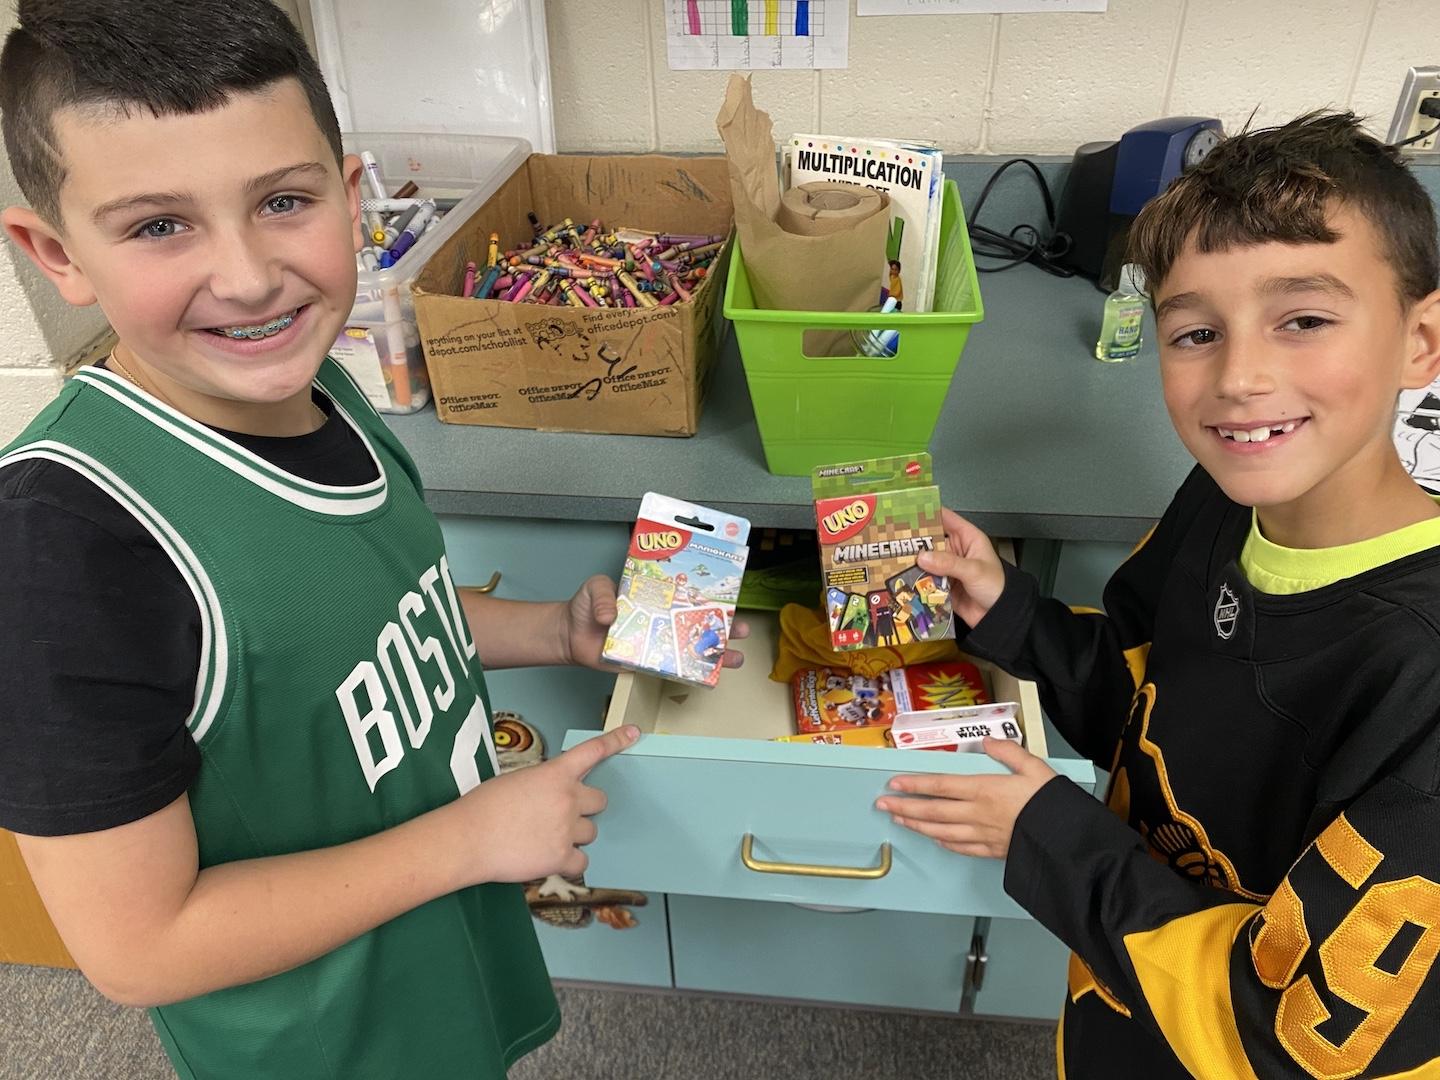 Vito Shinton and Leo Pasquarelli select games for their indoor recess